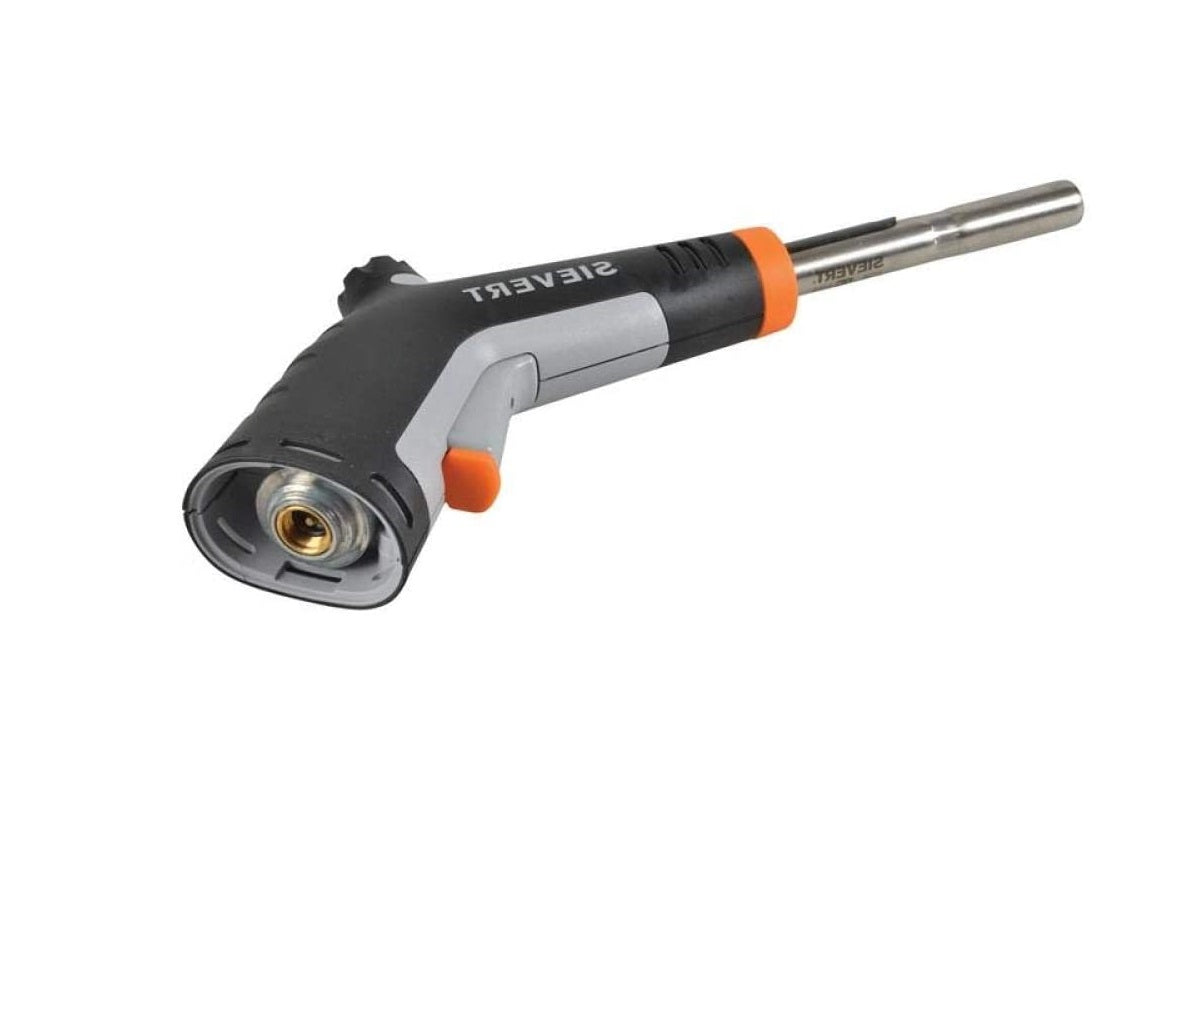 Sievert Powerjet Blowtorch With Interchangeable Burners, Fits M14 x 1.5